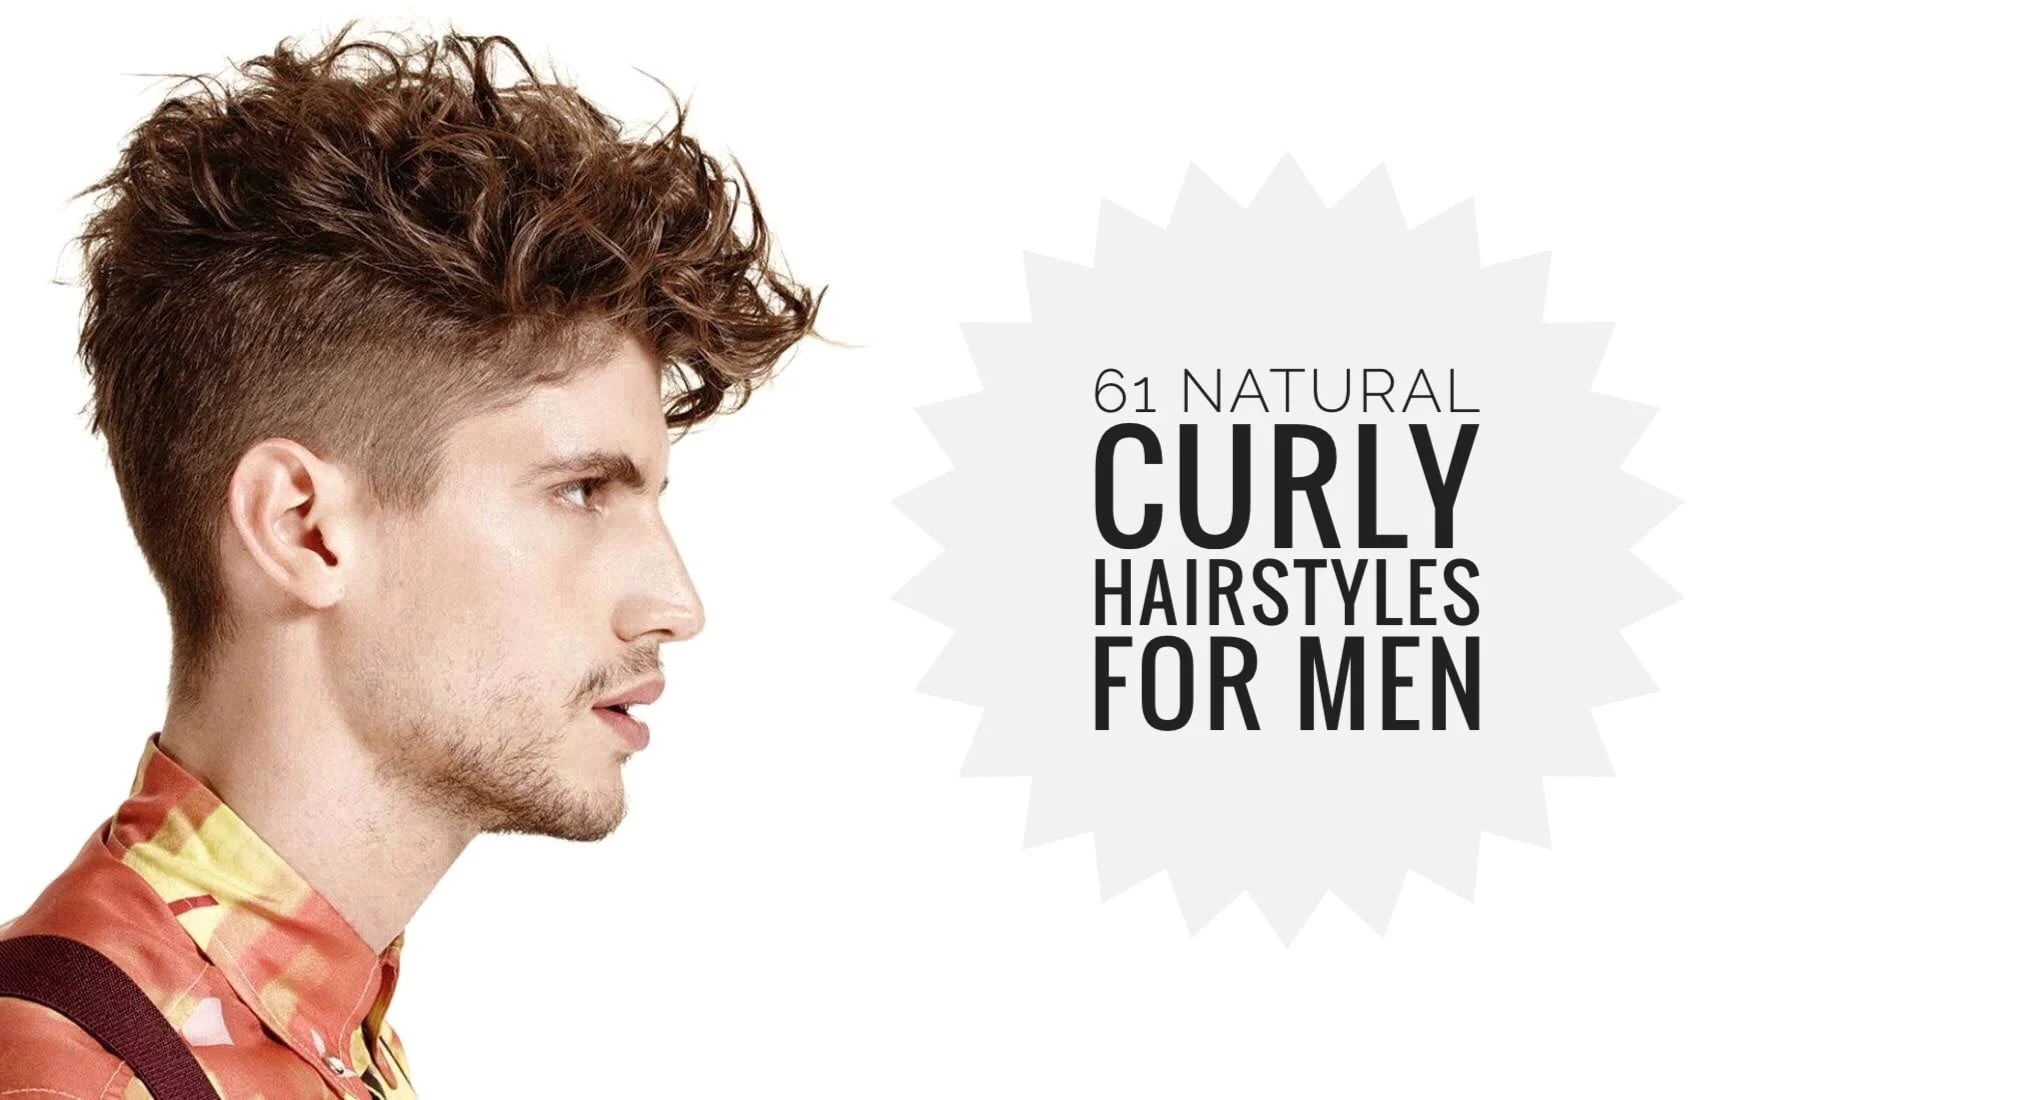 8 Trendy Long Curly Hairstyles For Men to Try This Summer 2023